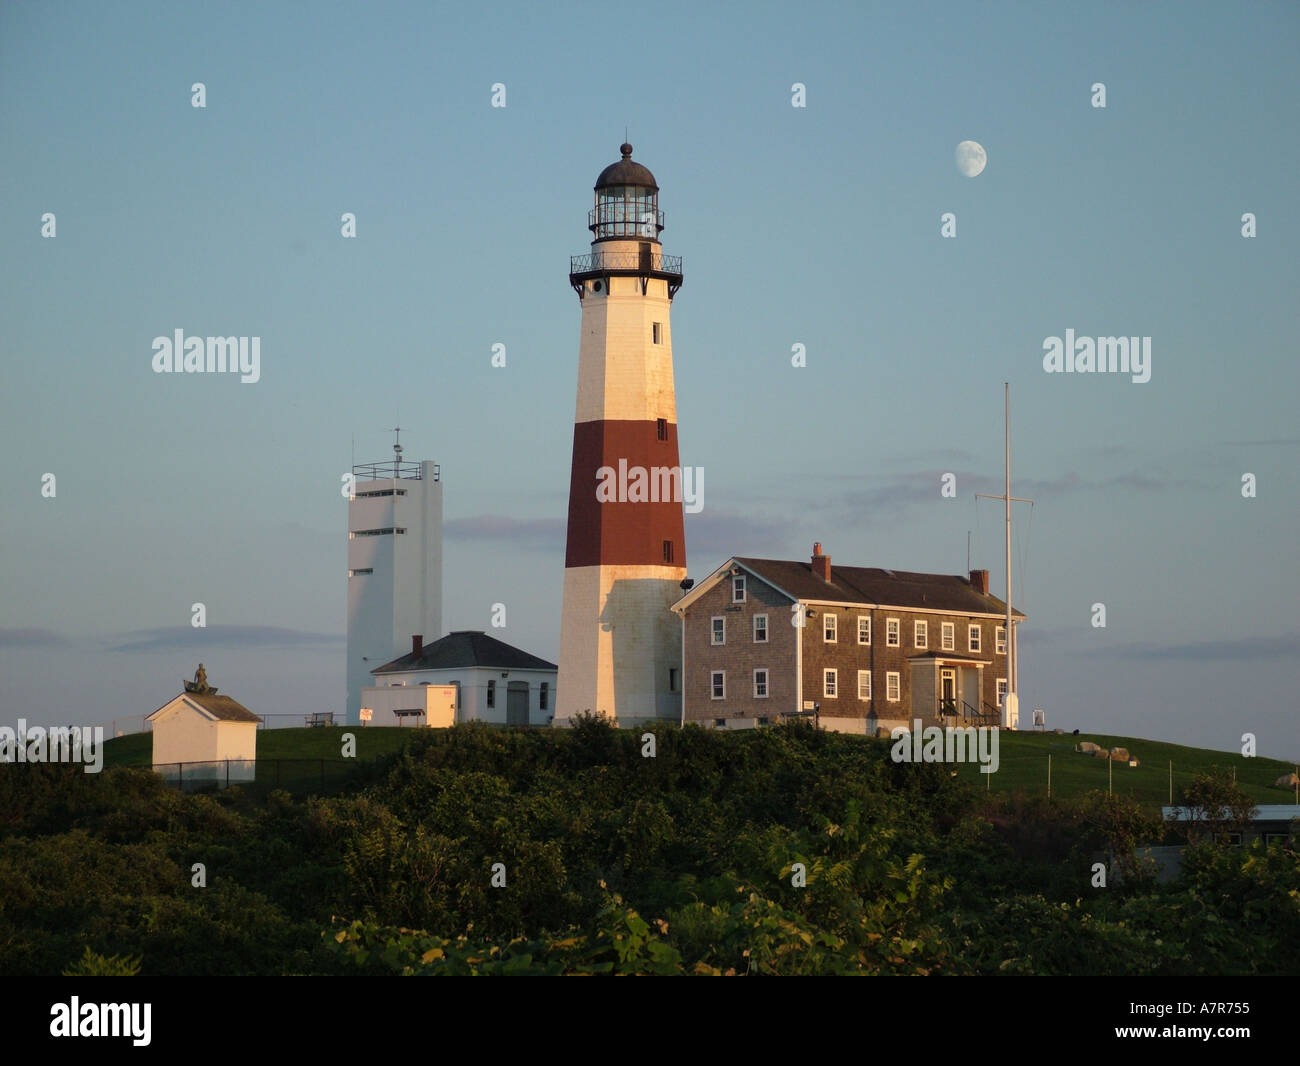 AJD37392, Montauk, NY, New York, Long Island Banque D'Images